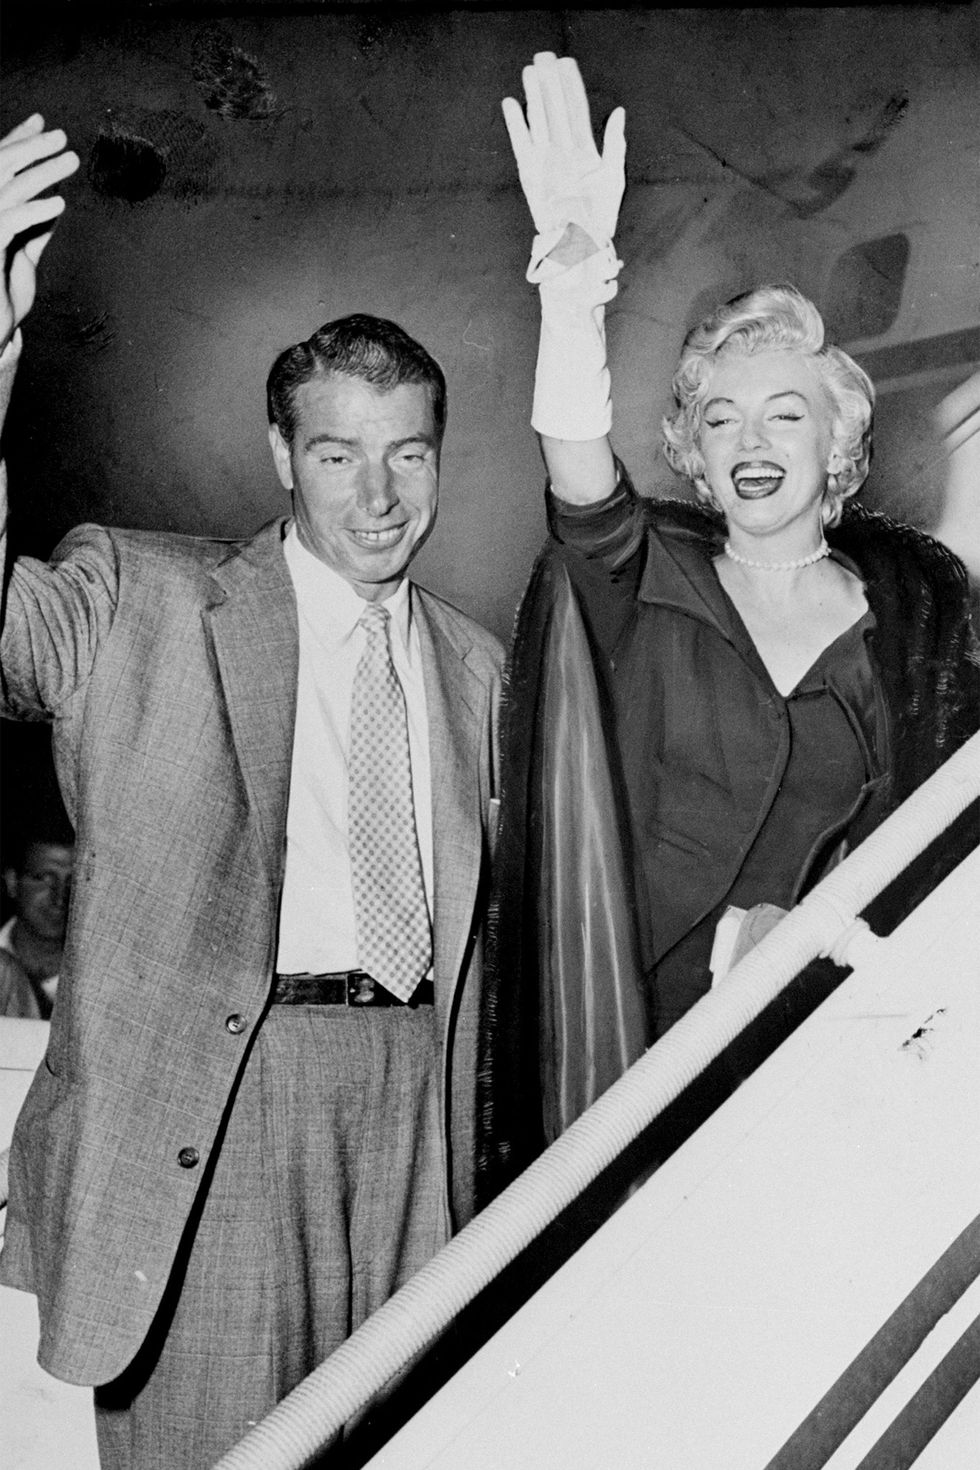 Images From Marilyn Monroe's Marriages - Pictures Documenting